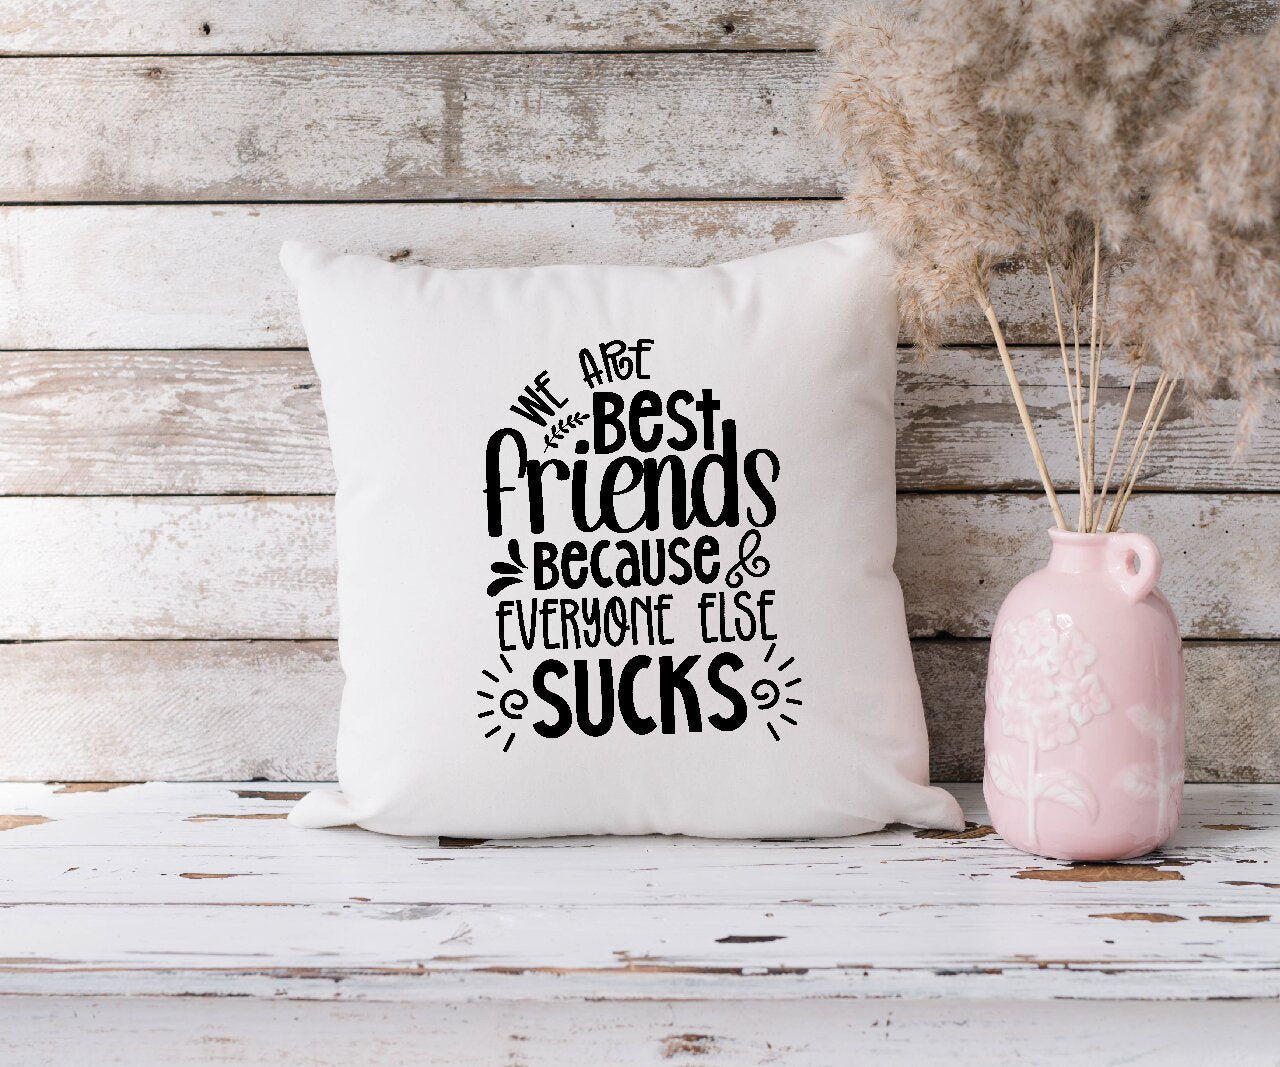 We Are Best friends Because Everyone Else Sucks - Cushion Cover